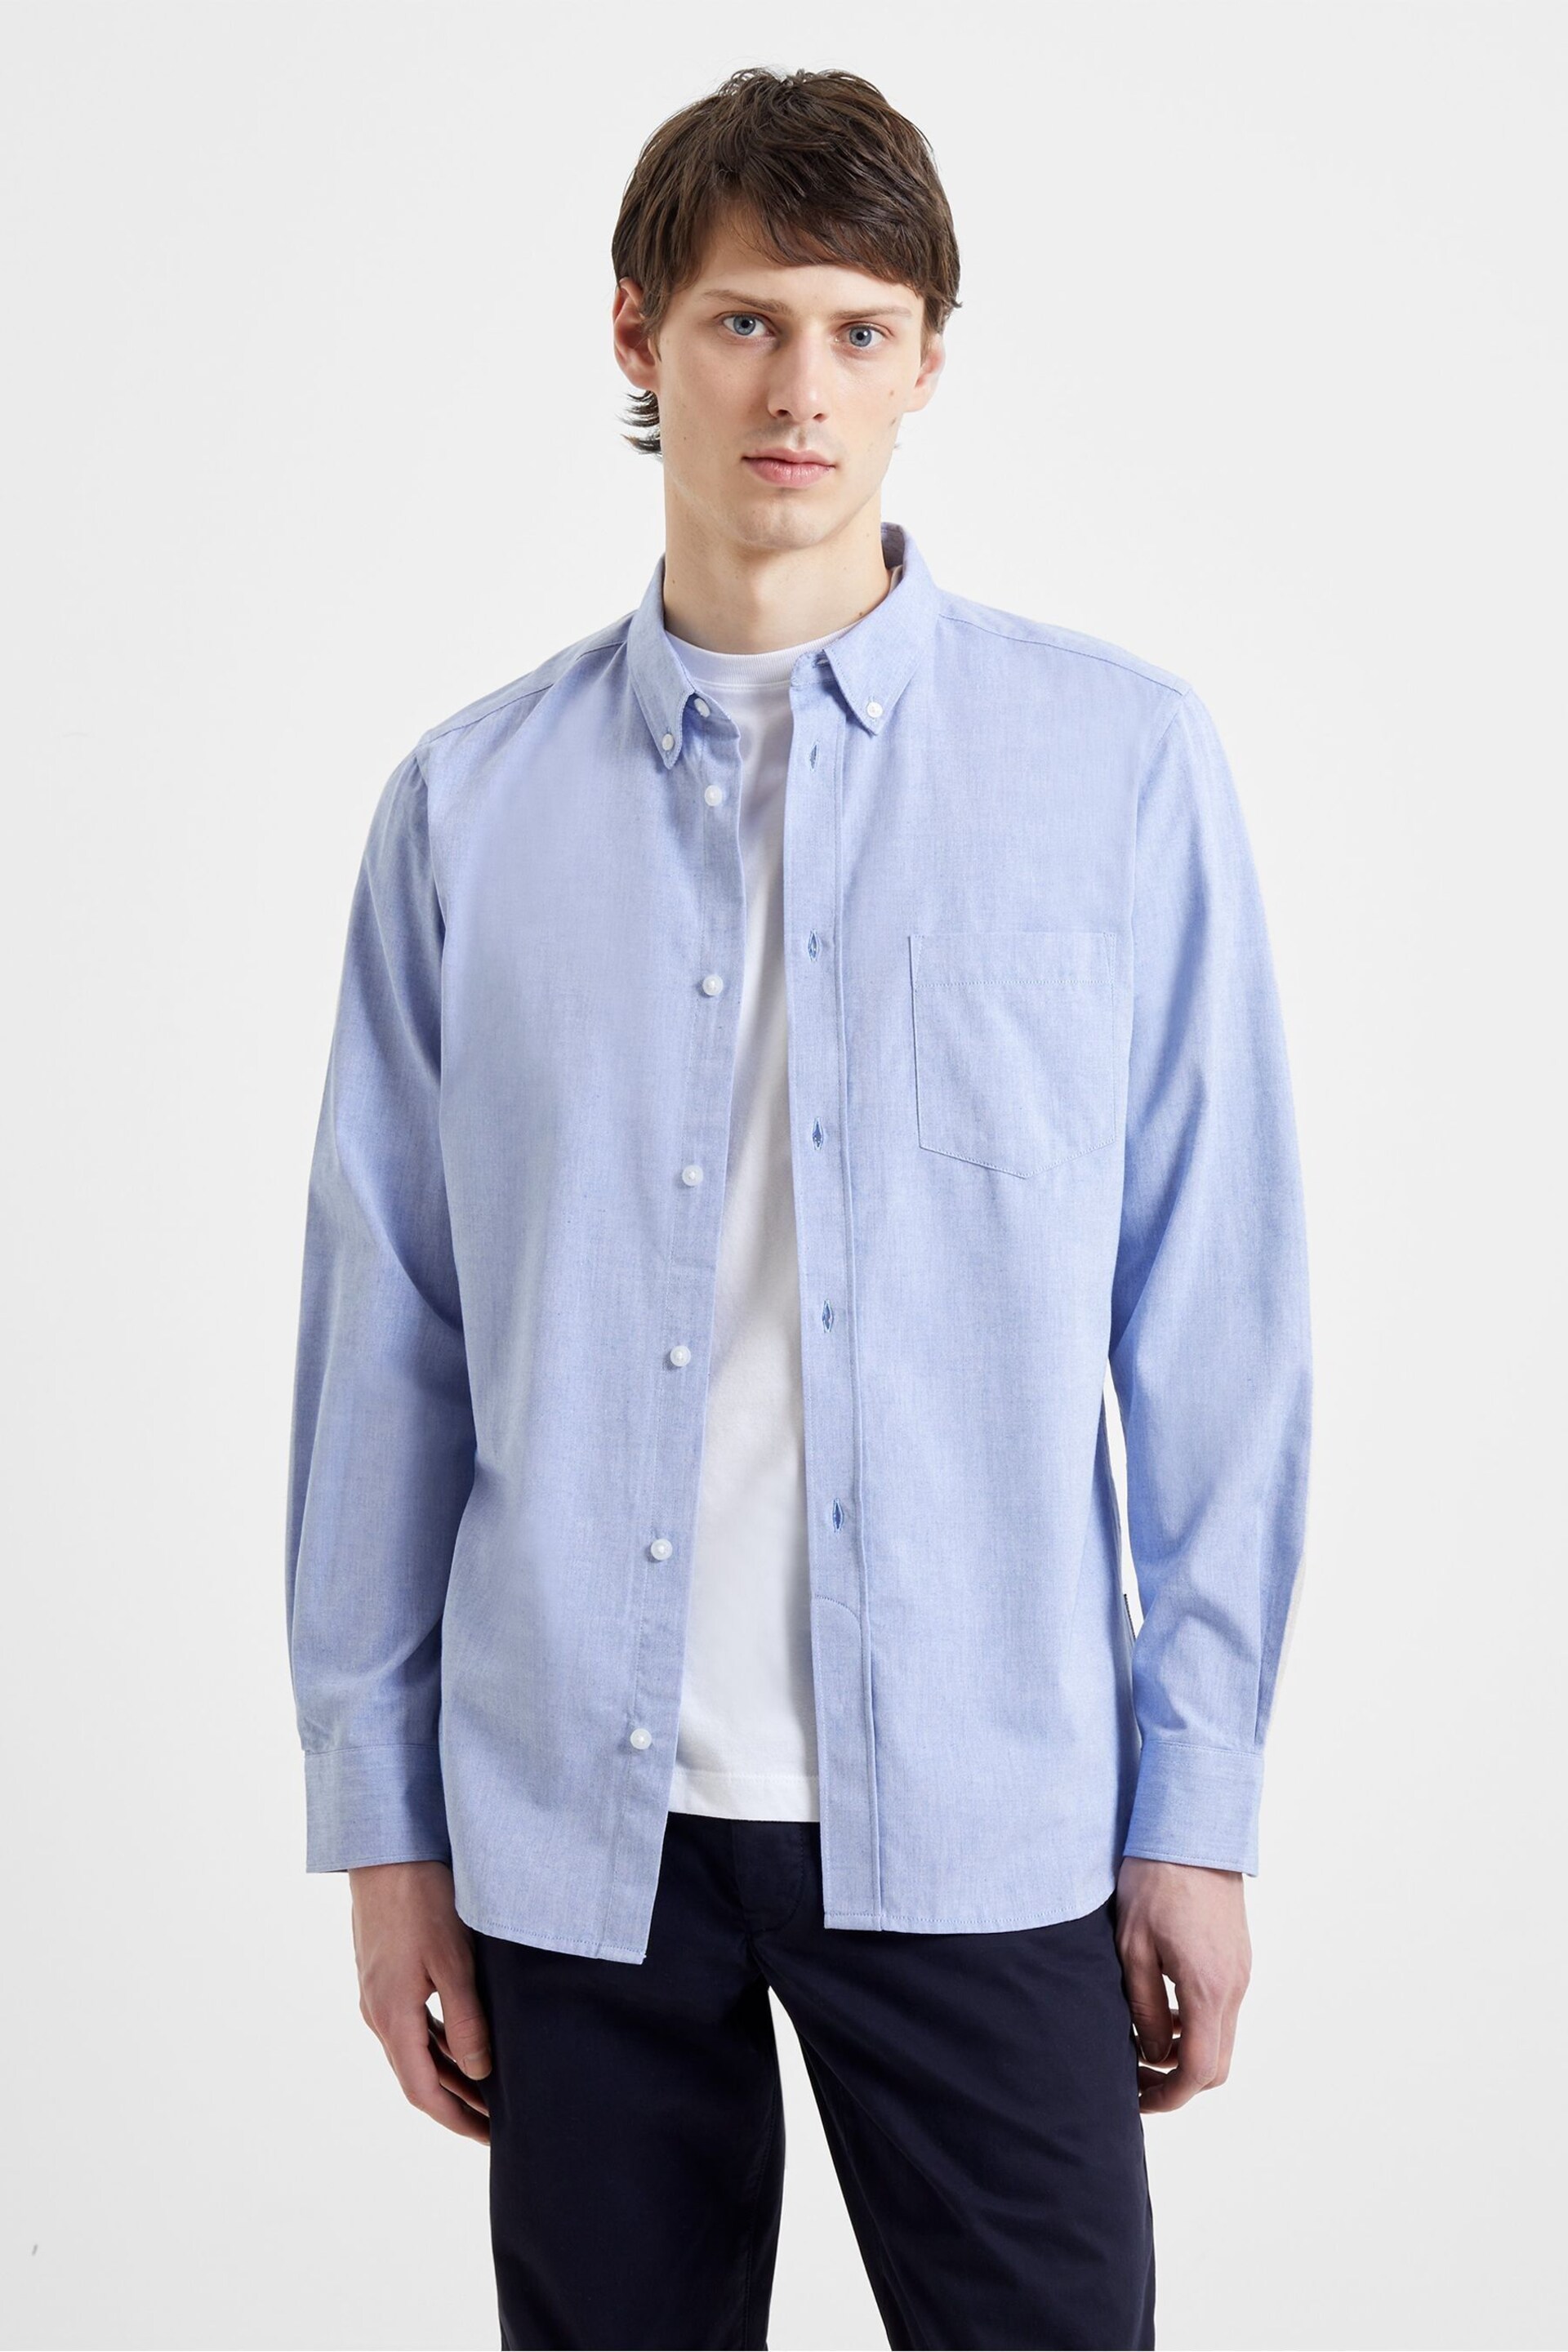 French Connection Blue Oxford Long Sleeve Shirt - Image 6 of 7